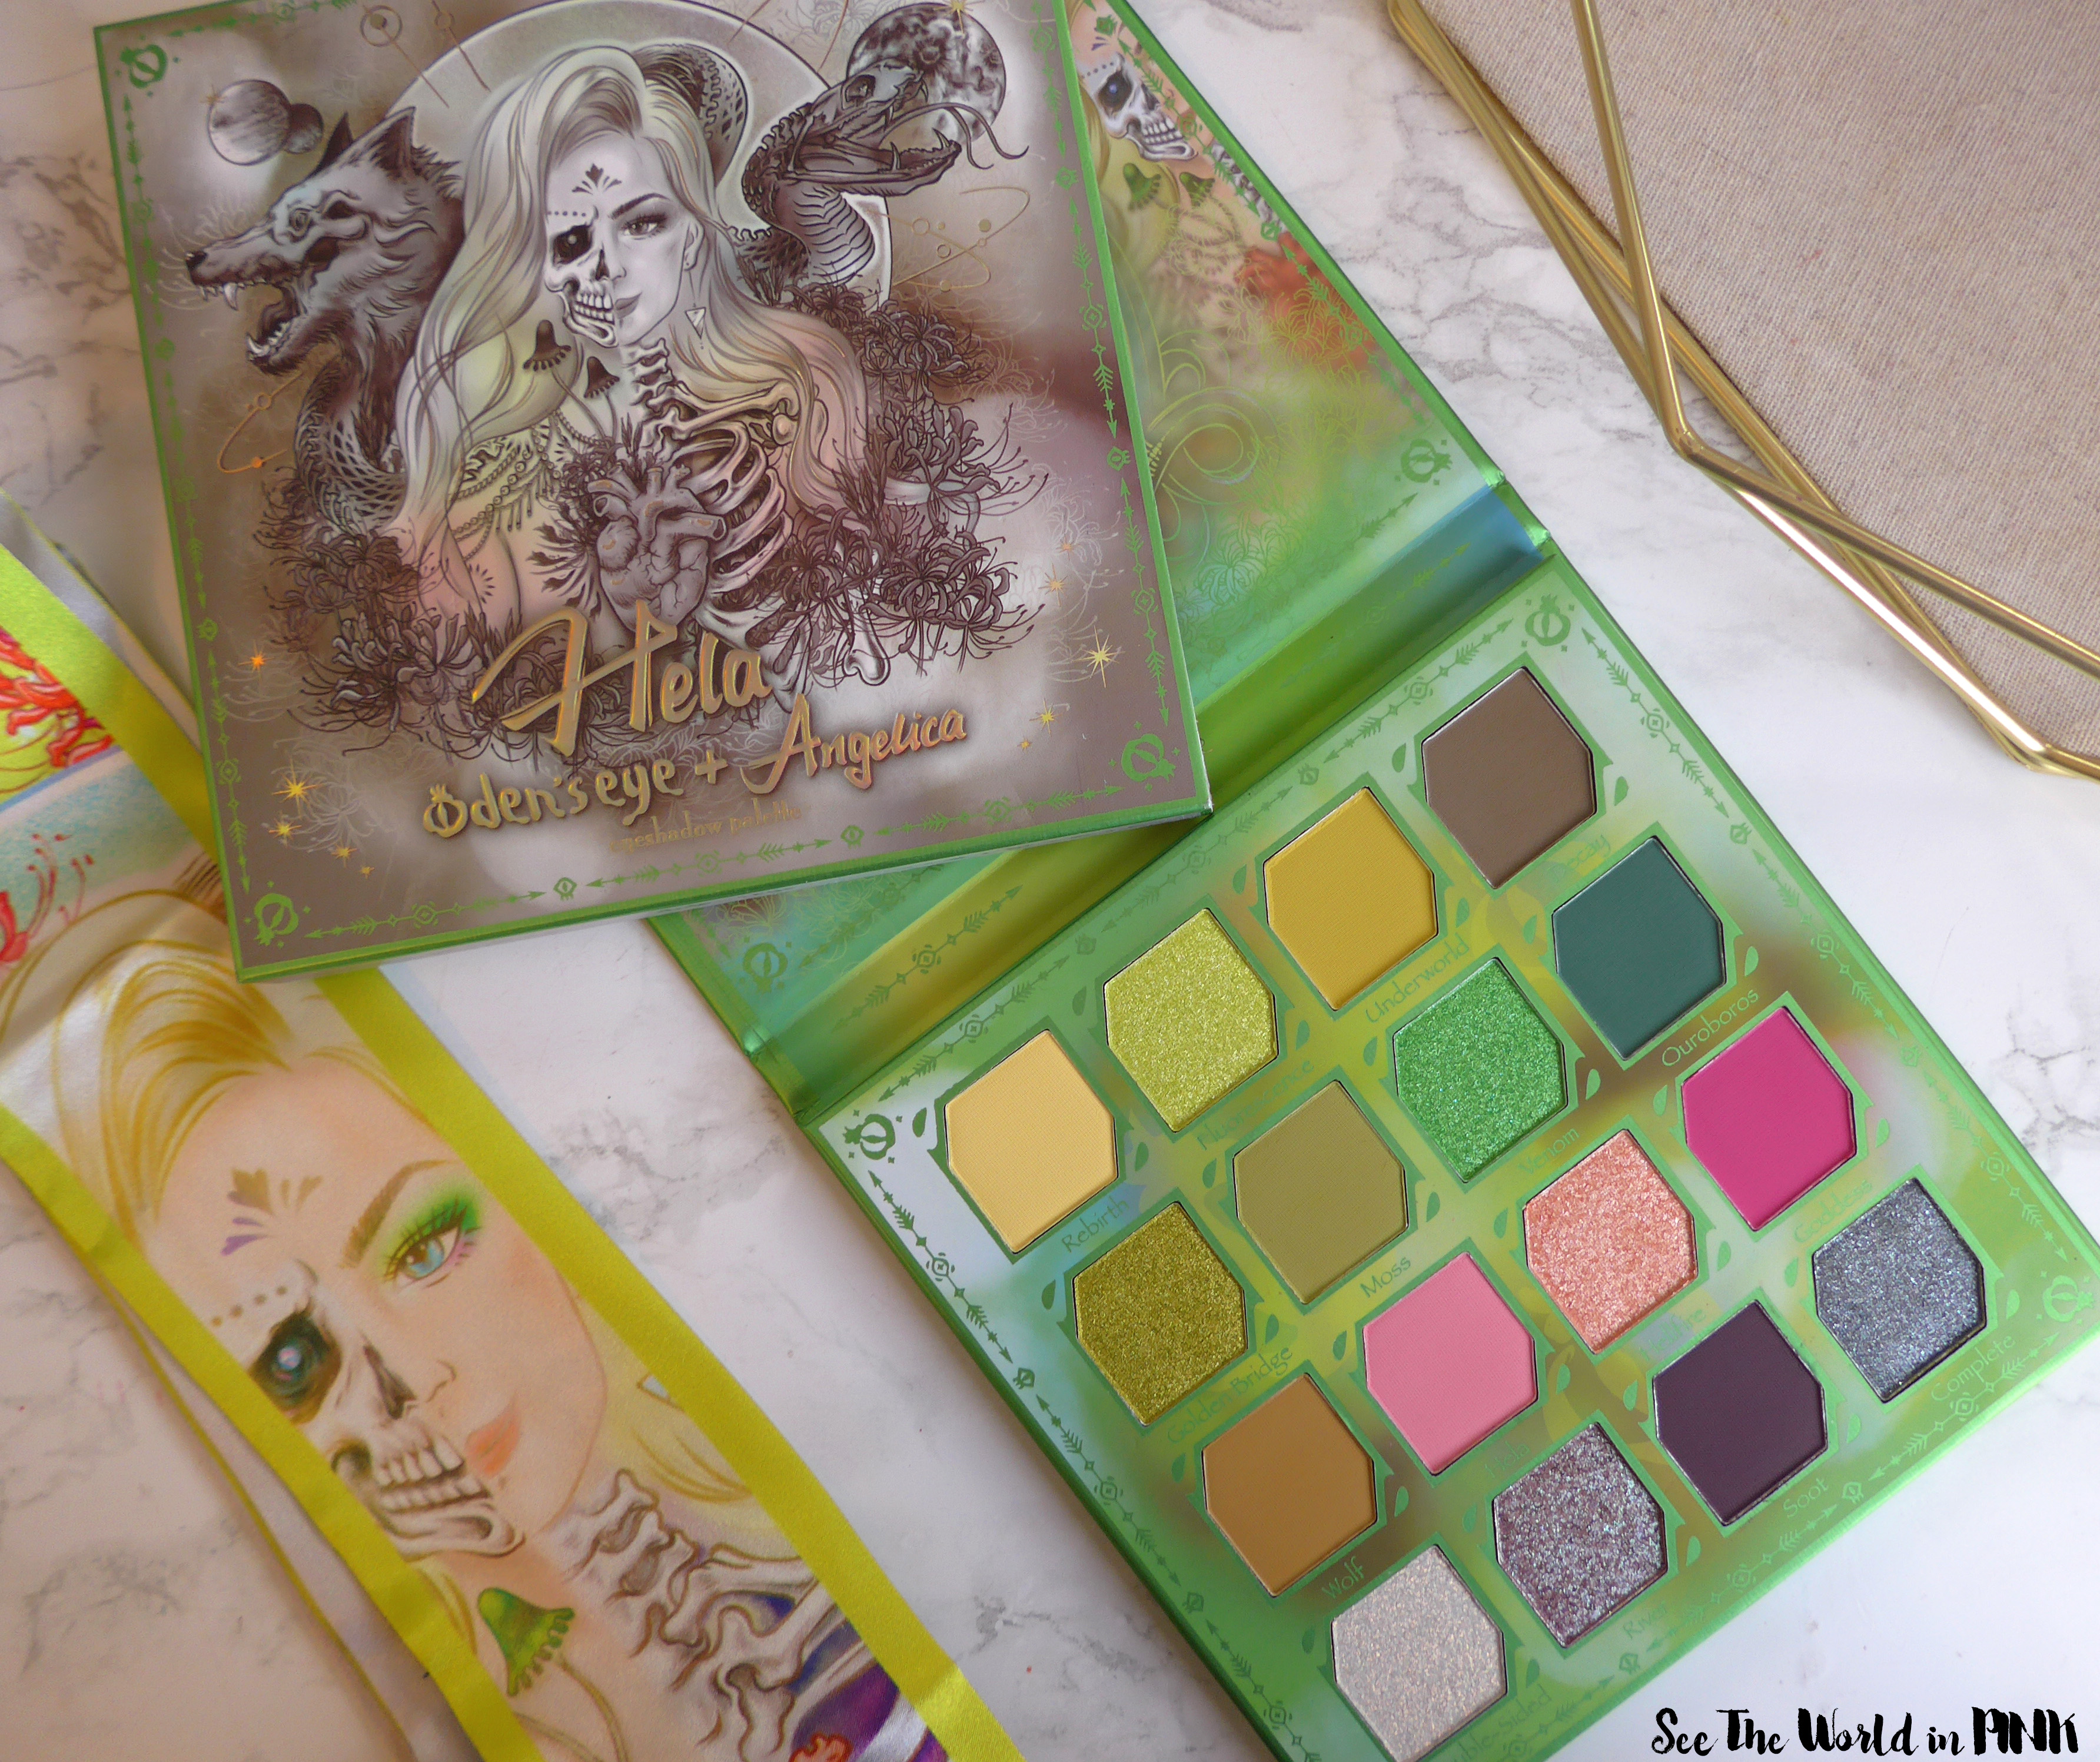 Oden's Eye x Angelica Nyqvist Hela Eye Shadow Palette - Swatches, Thoughts, and 3 Looks